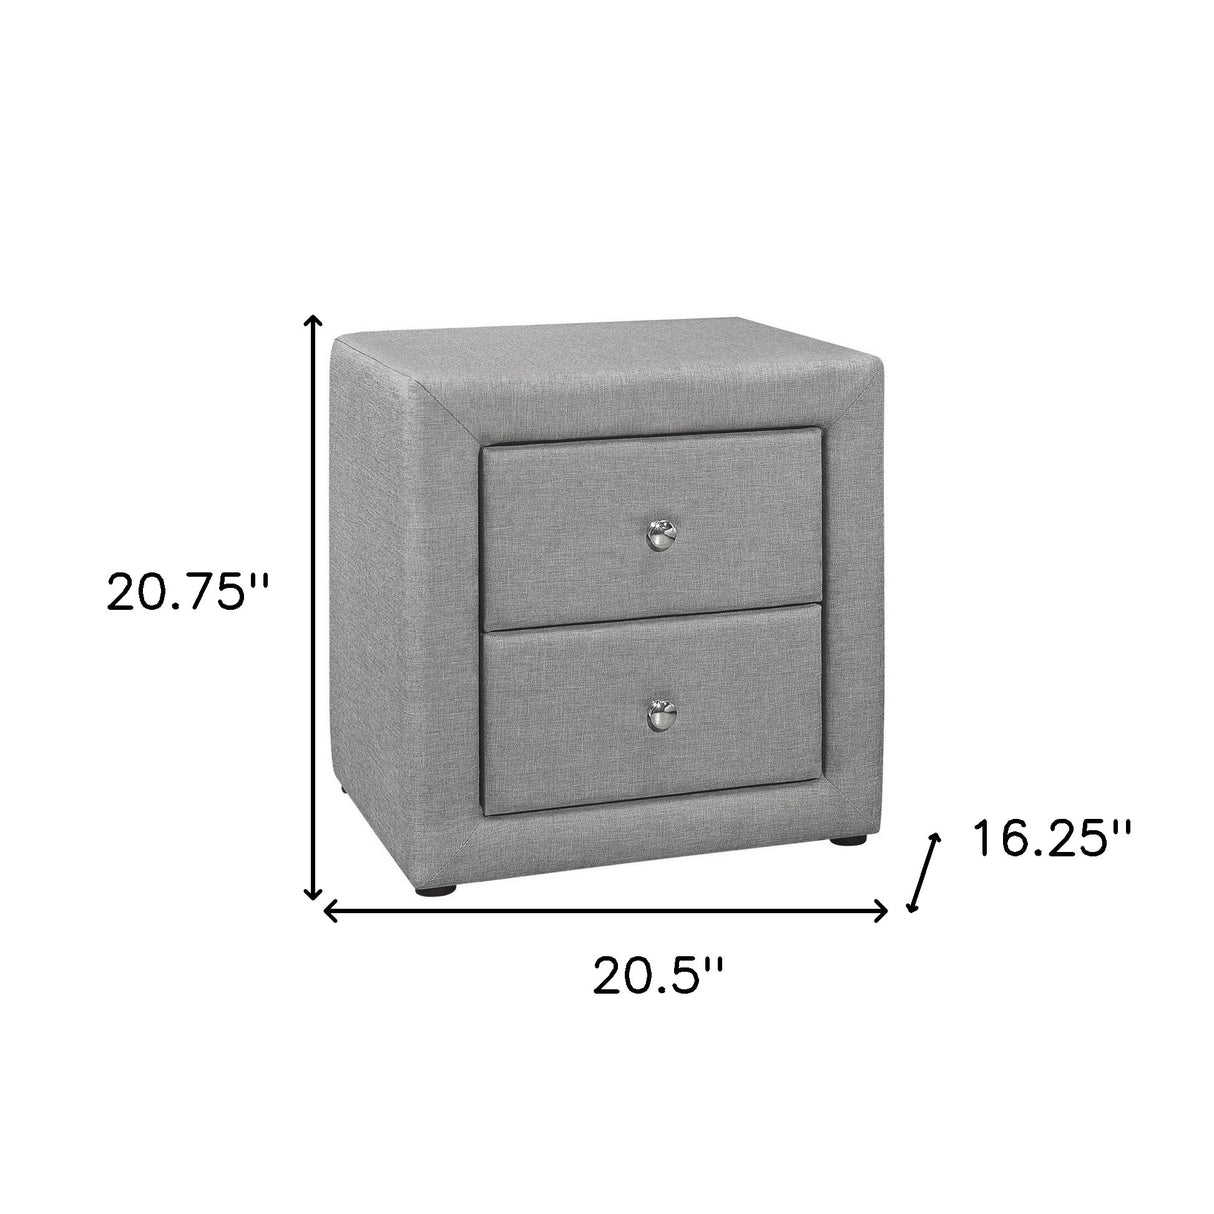 21" Gray Linen Blend Two Drawer Nightstand